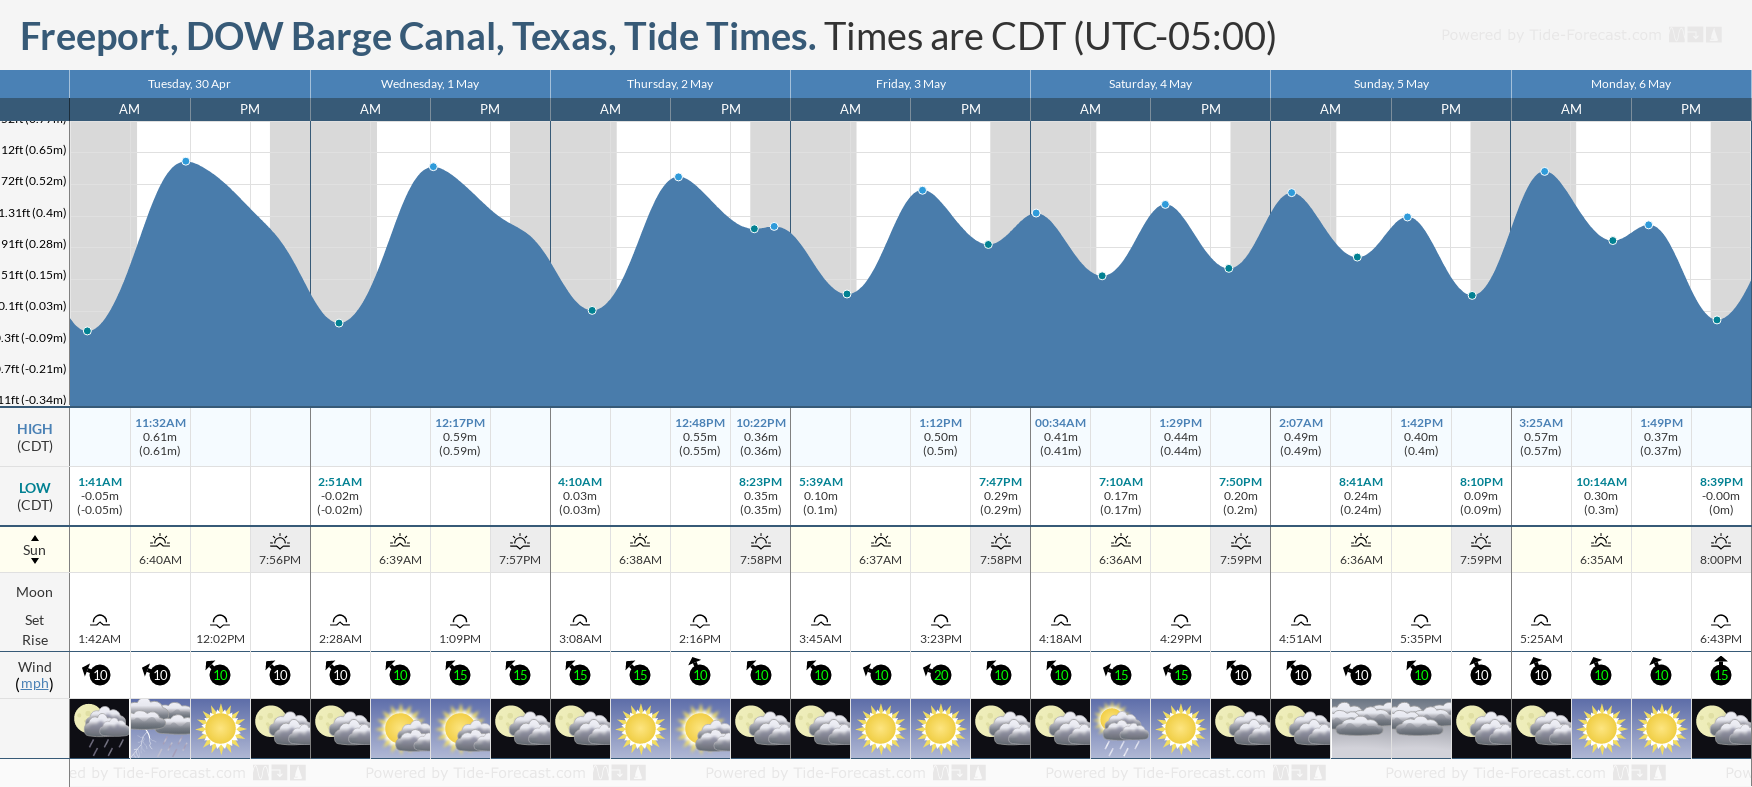 Freeport, DOW Barge Canal, Texas Tide Chart including high and low tide tide times for the next 7 days